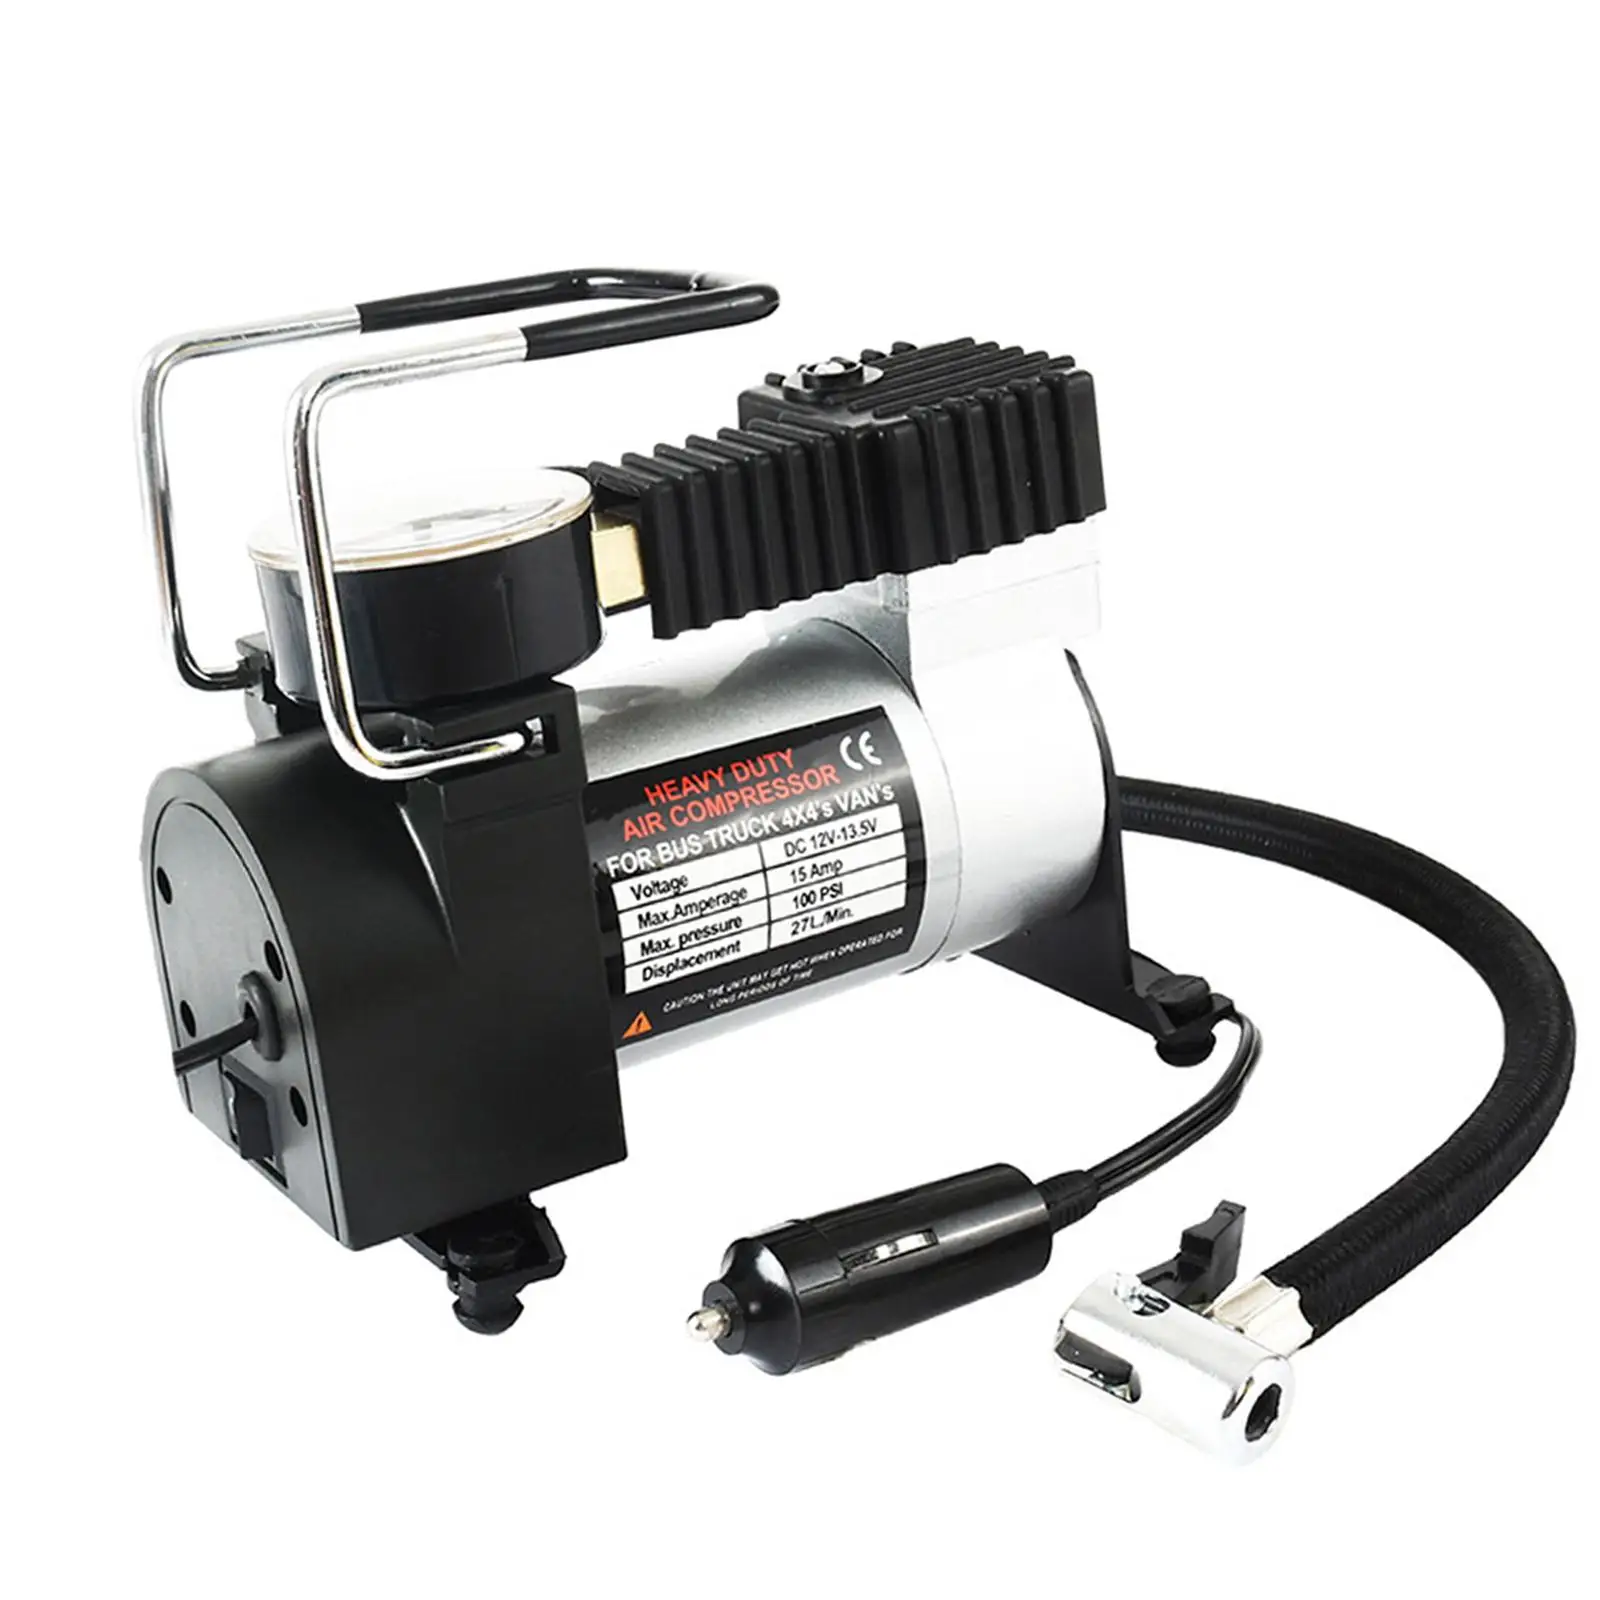 Tire Inflator Car Accessories Portable Air Compressor for Van SUV Cars